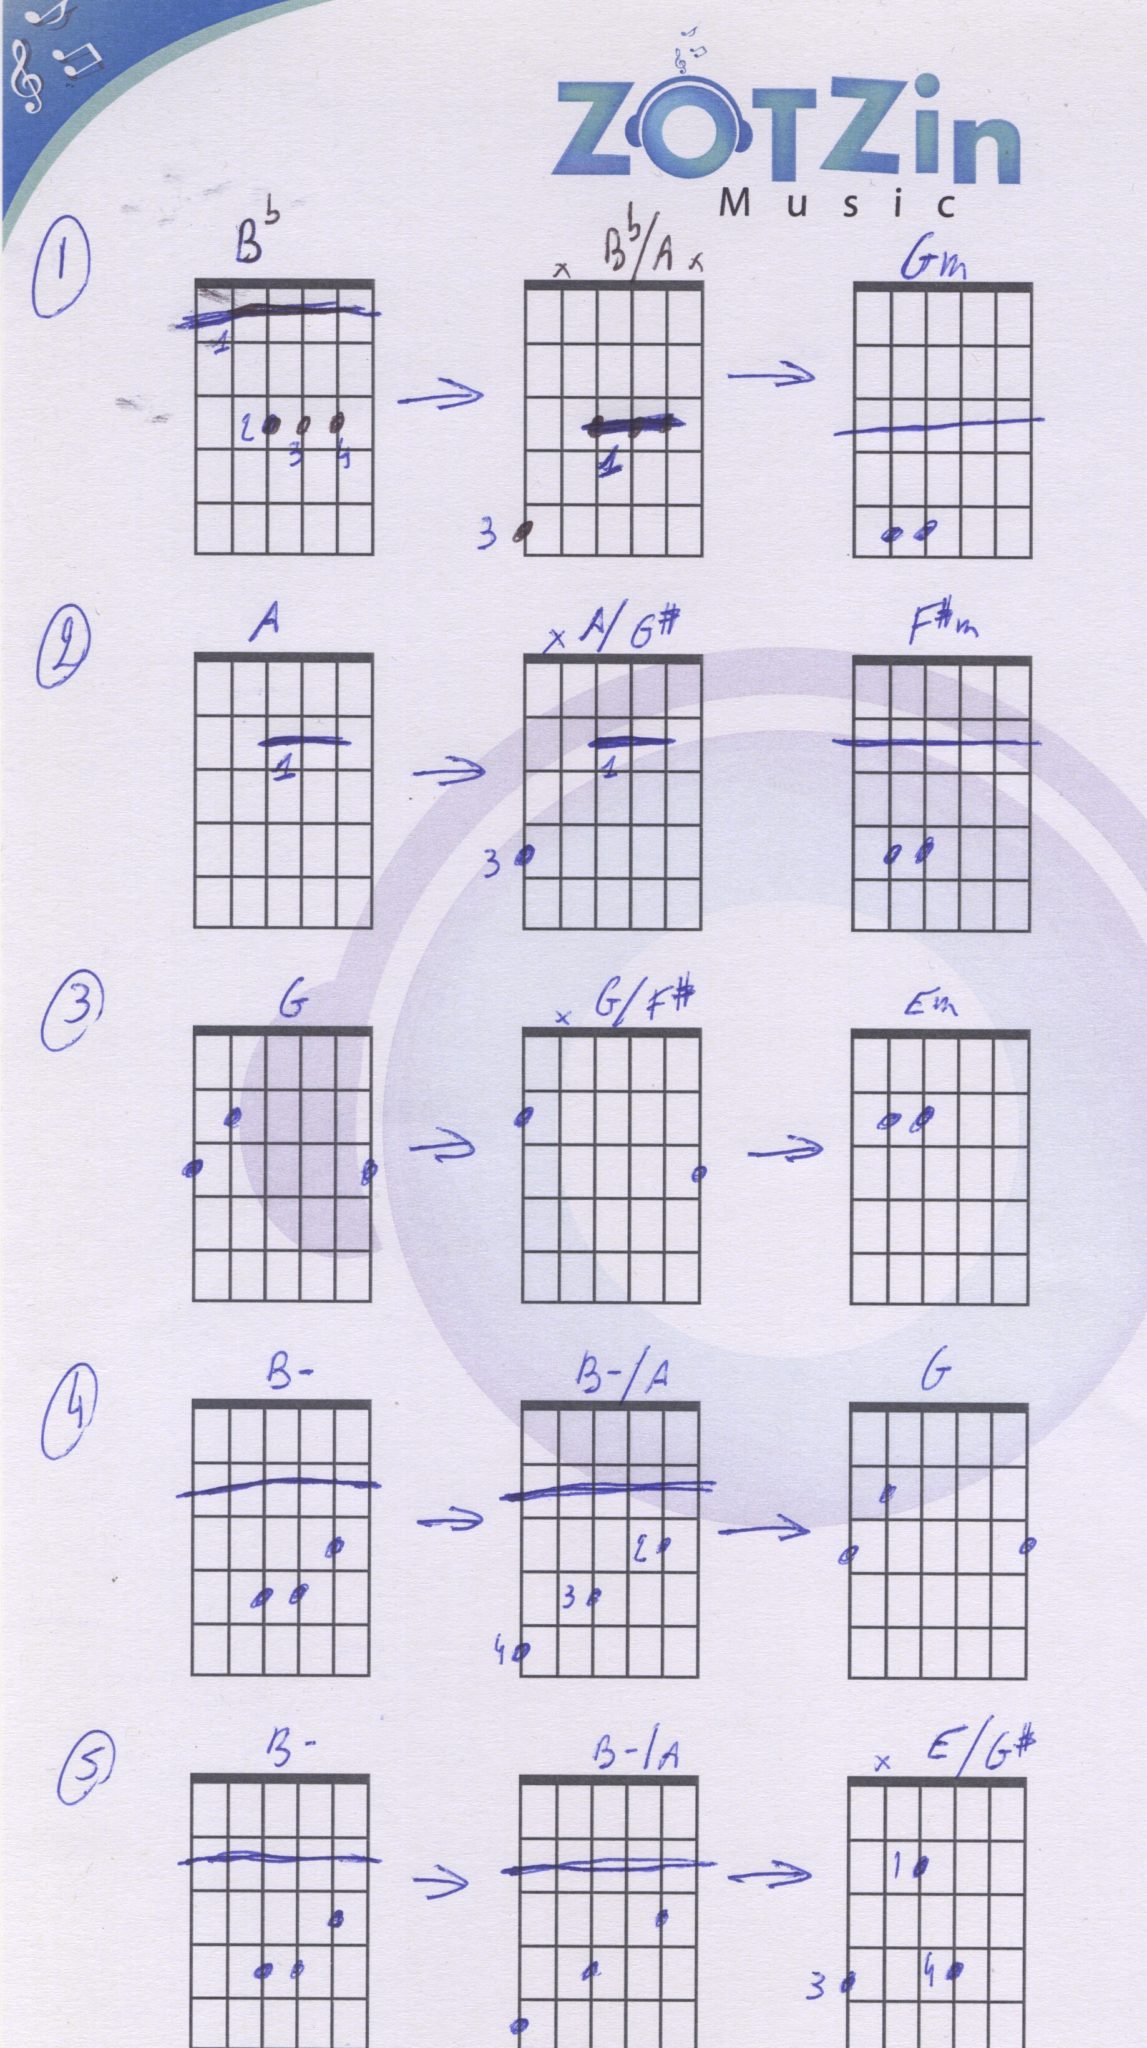 Great songwriting tricks: using hybrid chords as passing chords. 